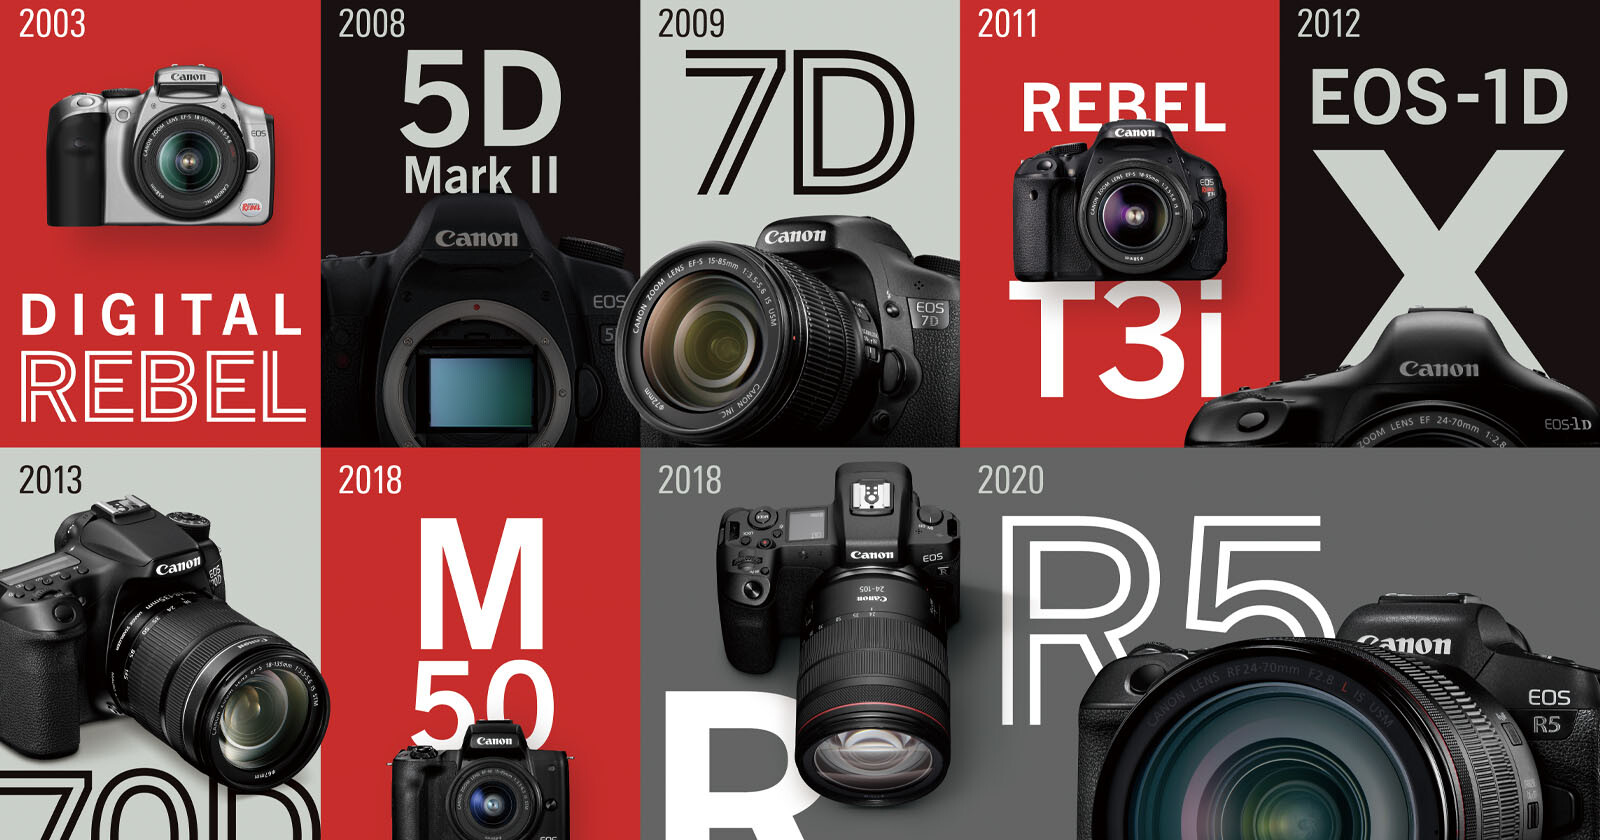 Canon Has Been the Number One Interchangeable-Lens Camera Brand for 20 Straight Years